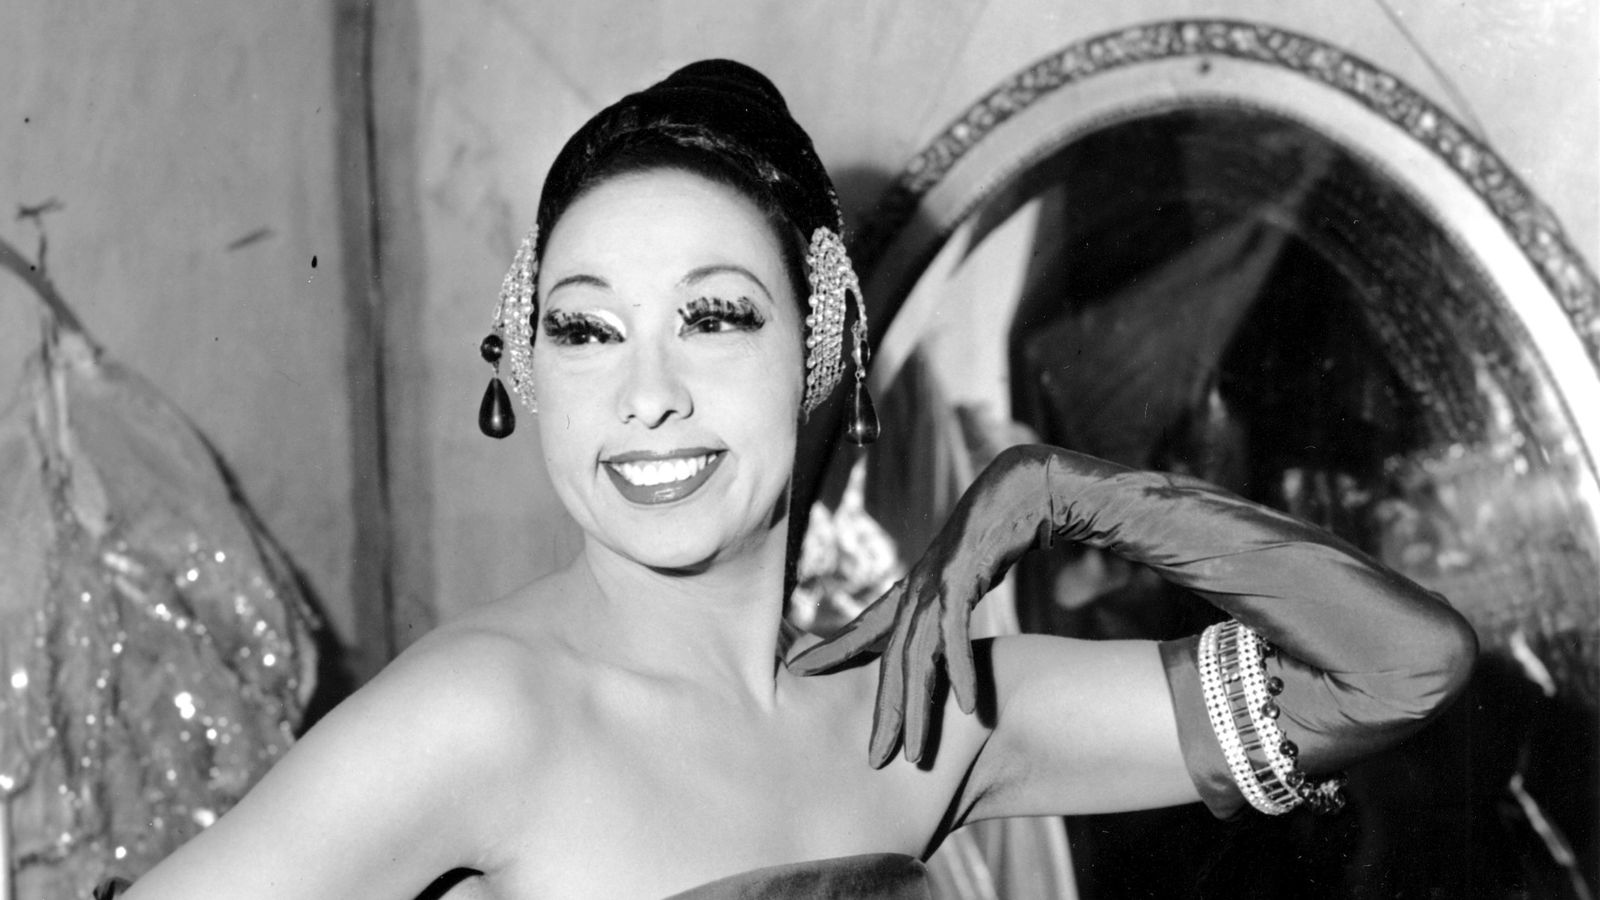 Josephine Baker to become first black woman buried in France’s Pantheon monument